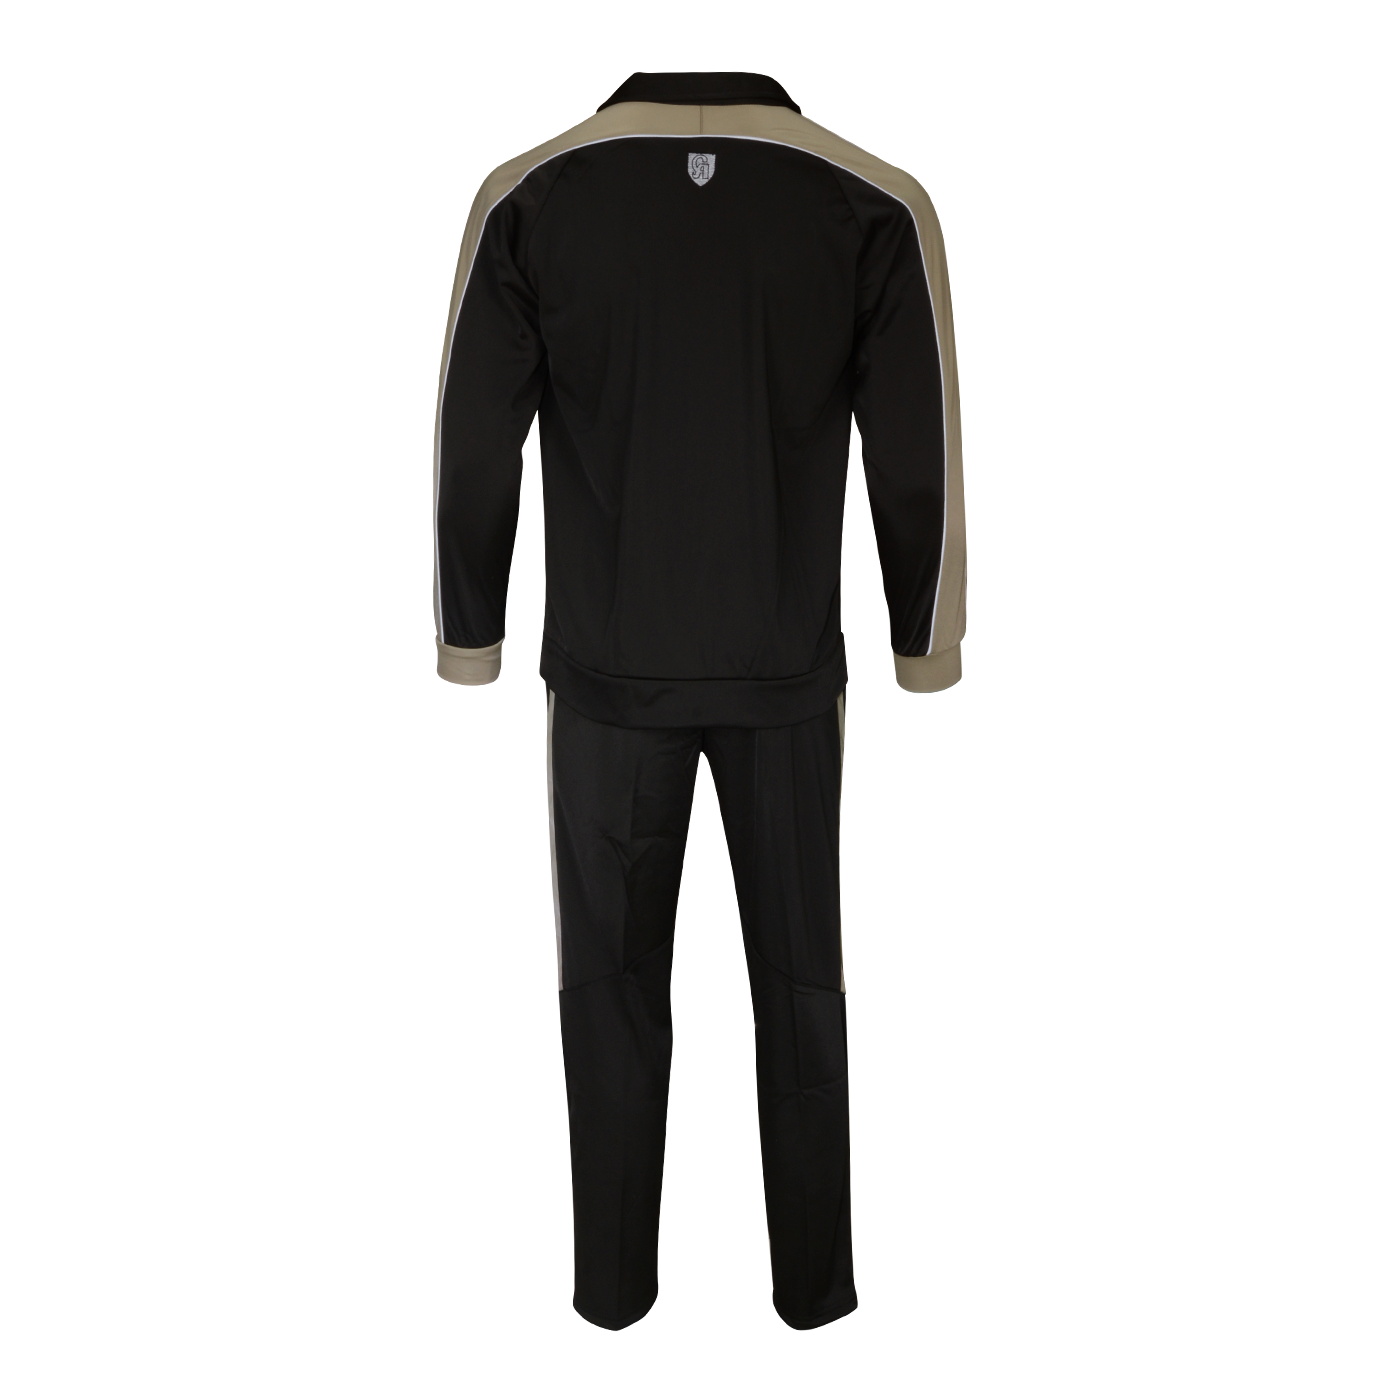 PLAYER EDITION TRACK SUIT : Buy Online At Best Prices In Pakistan ...